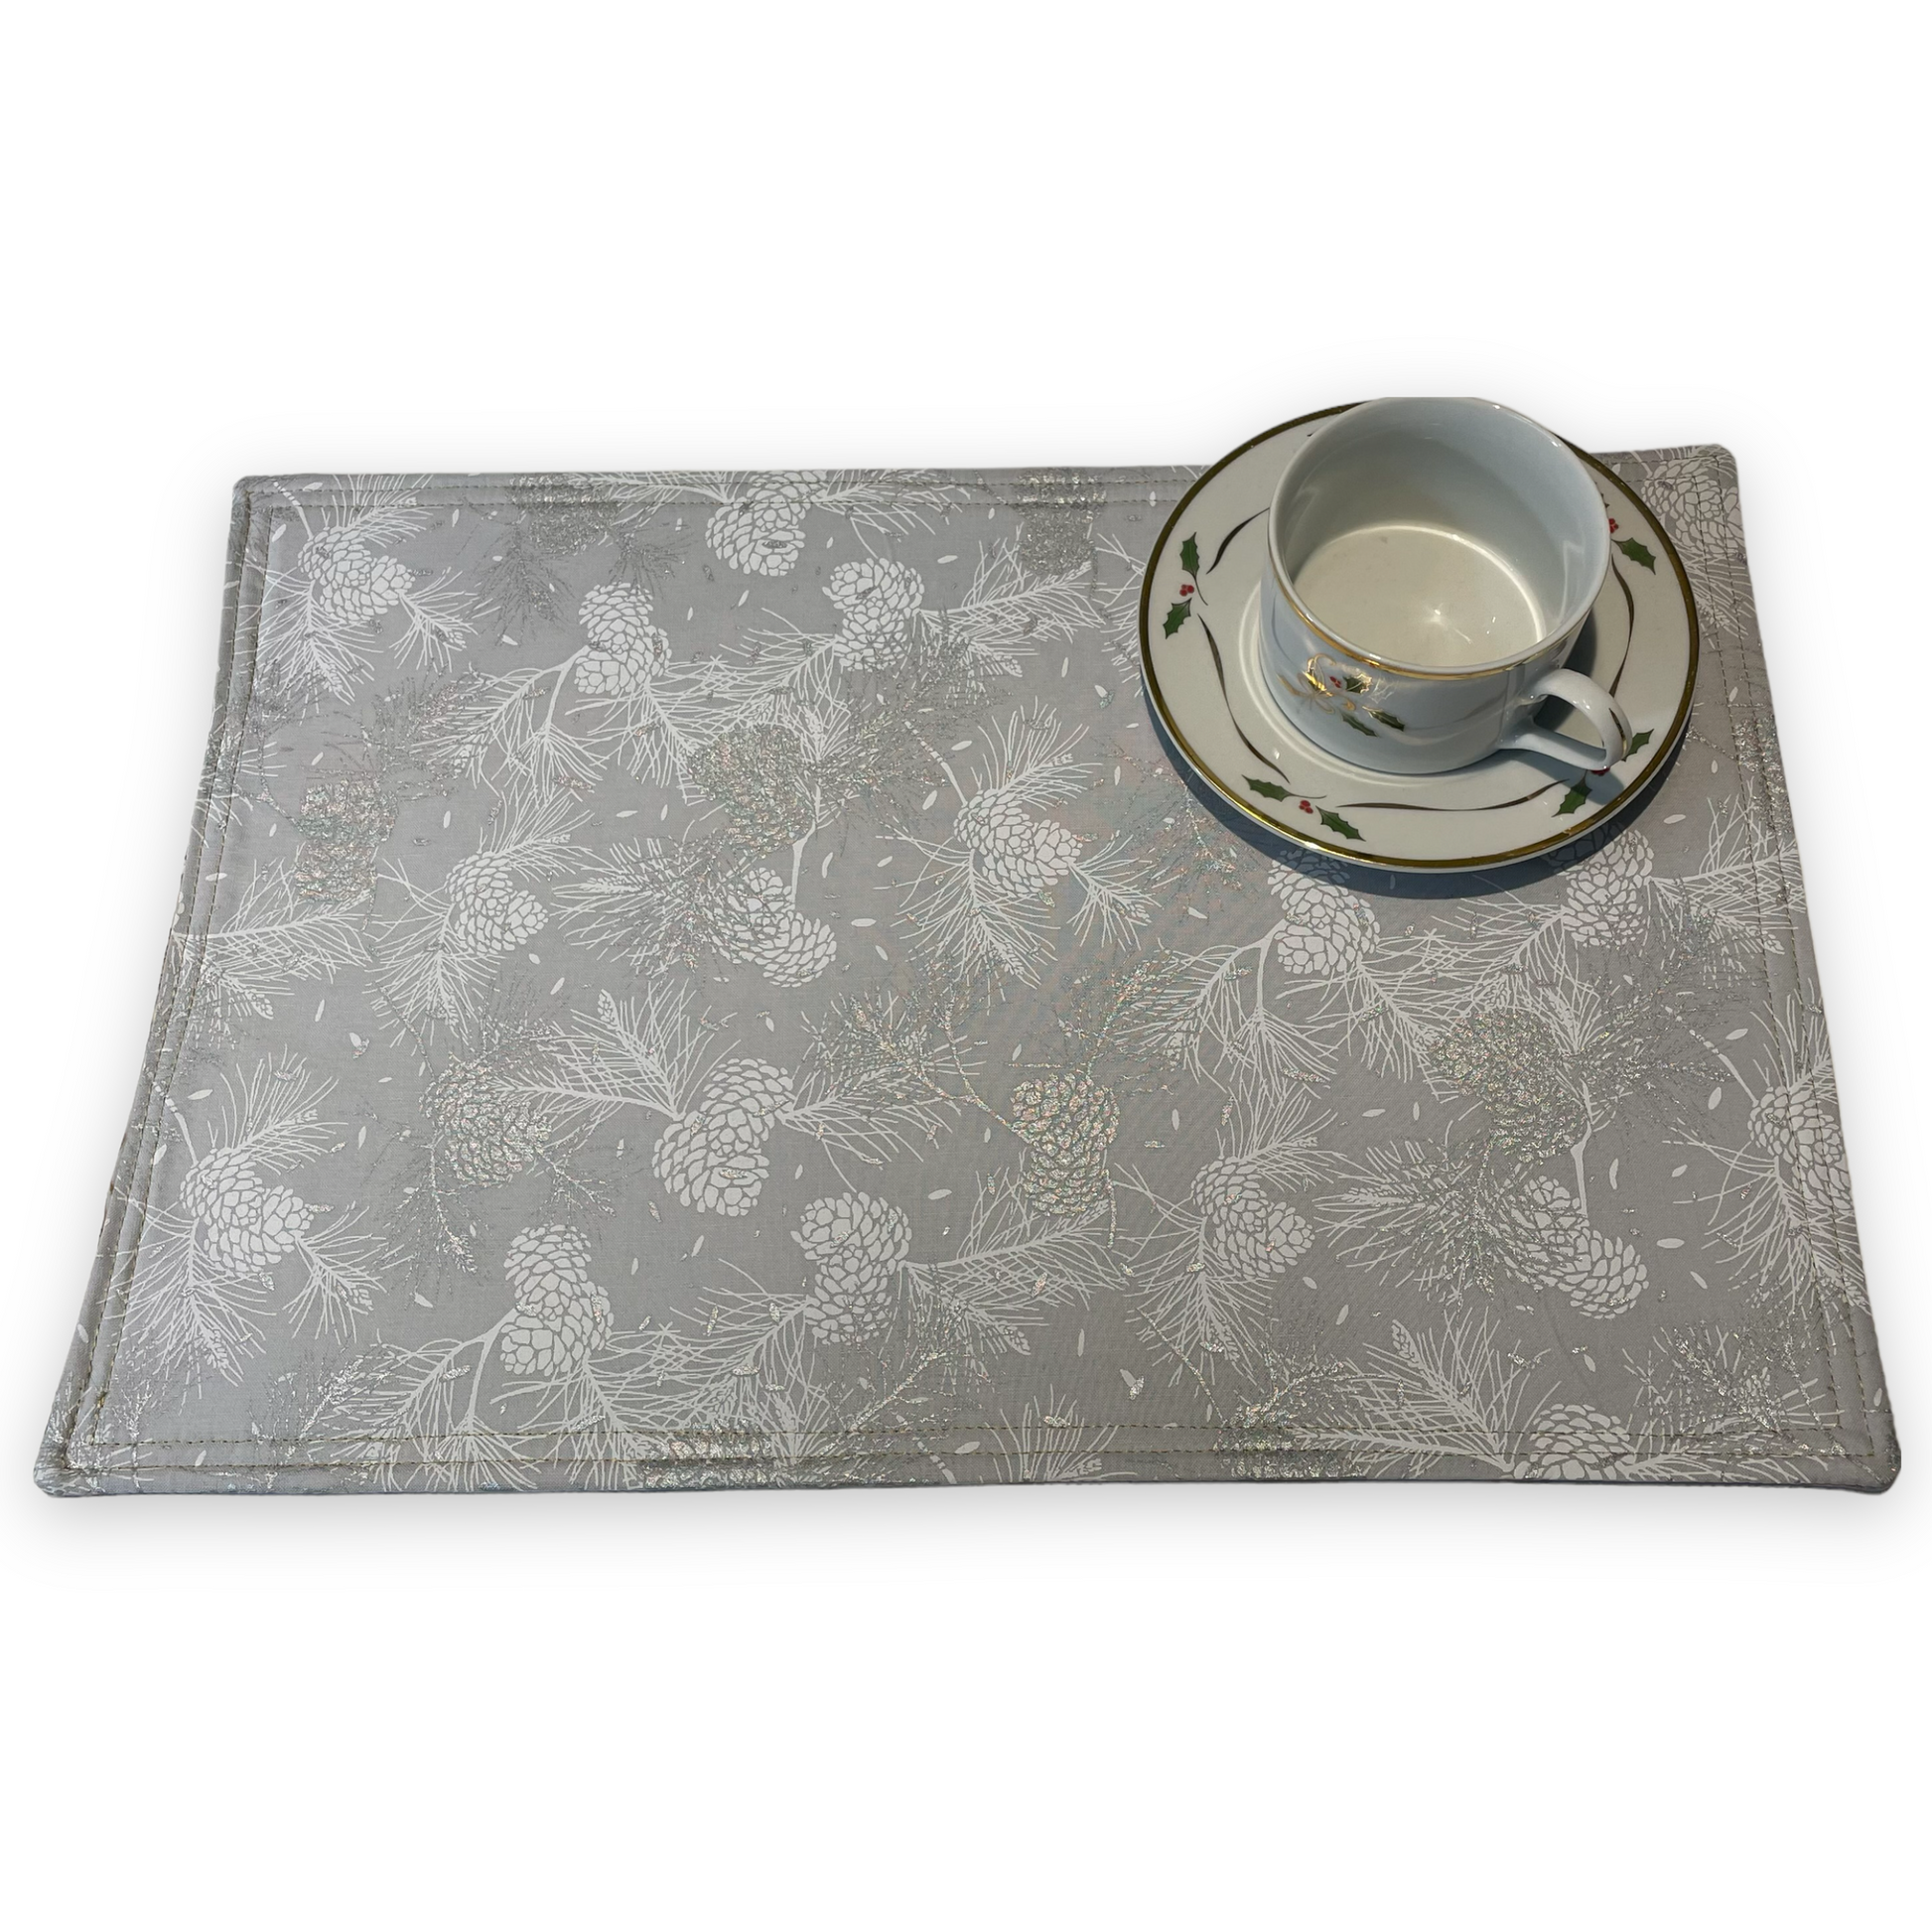 Reversible Christmas Placemats Featuring Gold and Silver Ornaments on one side and Silver Pinecones on the opposite side. Luxurious handmade Christmas Table Placemats. Part of a collection by Home Stitchery Decor. Check out all the mix and match items online.